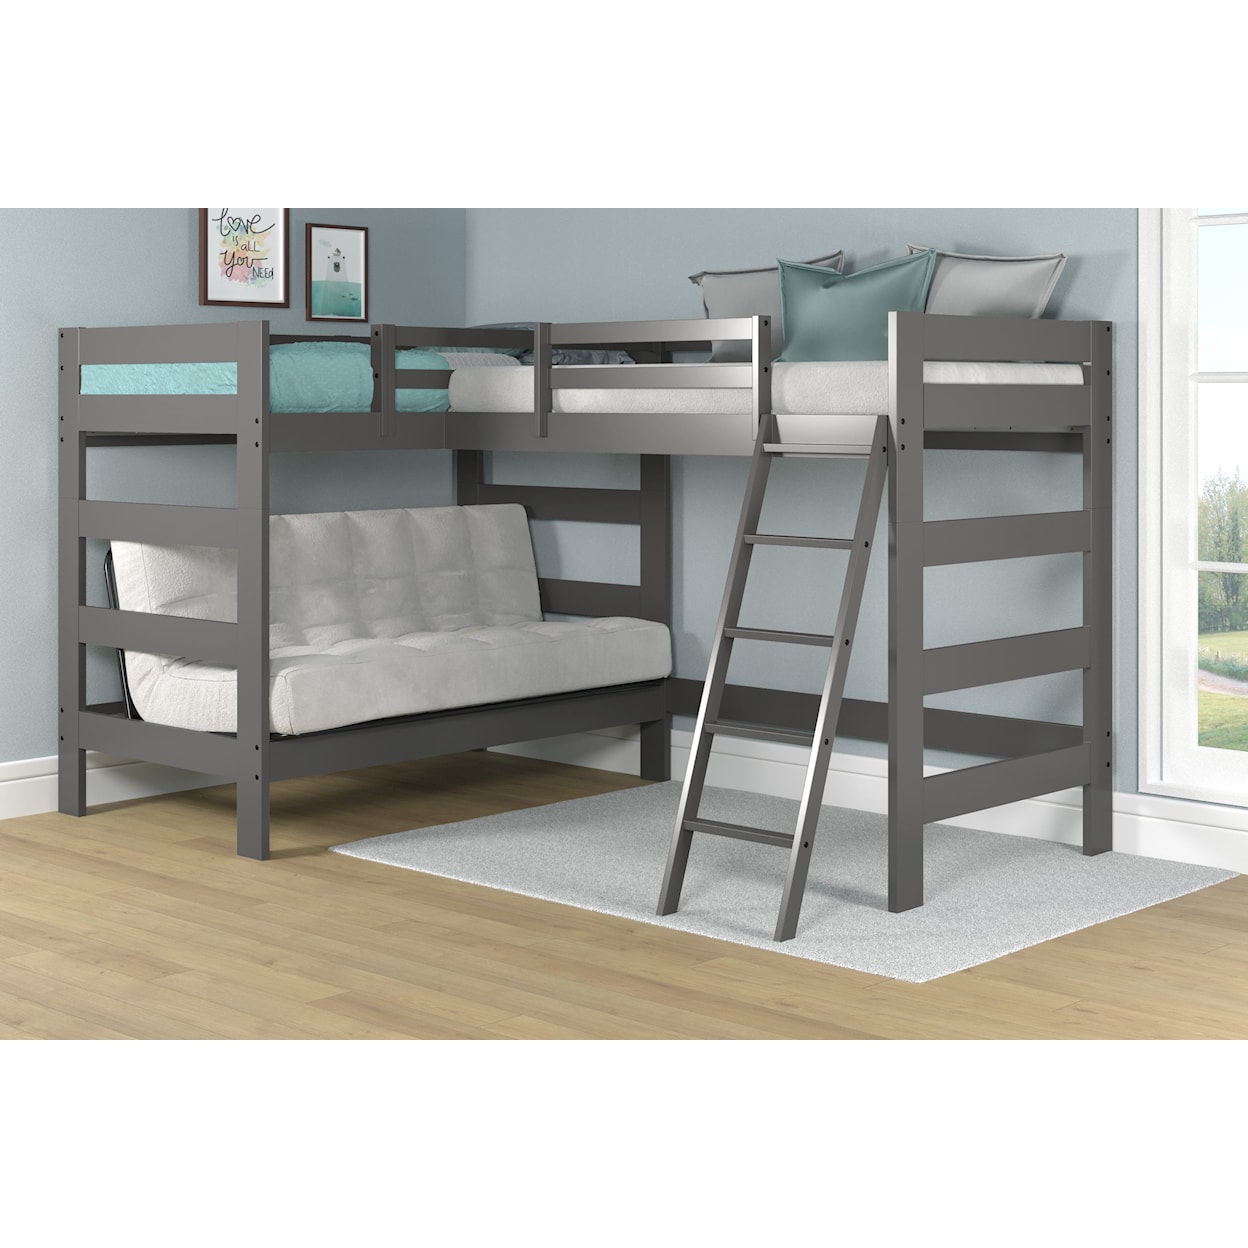 Canal House Bunk Beds Bunk Bed with Loft